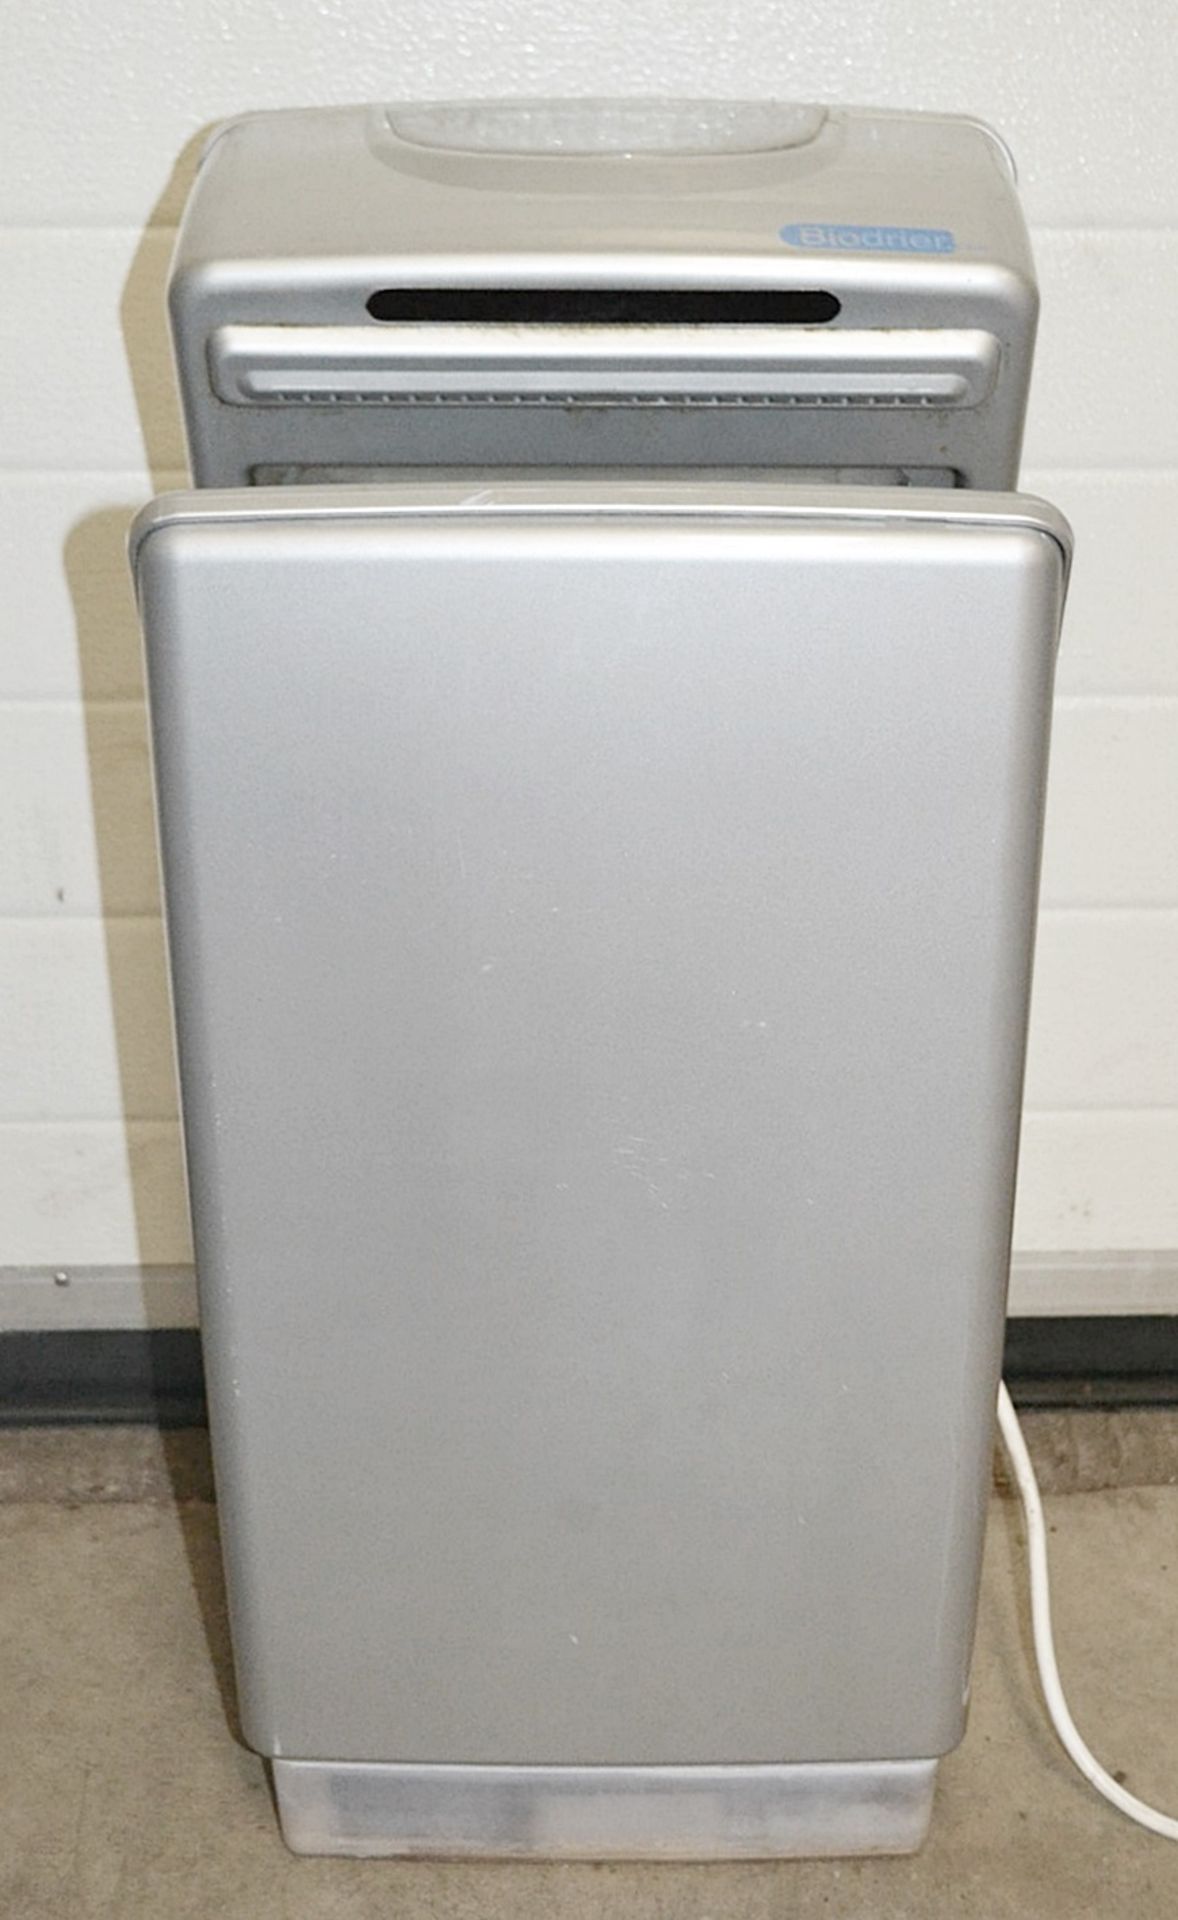 1 x BIODRIER Business Automatic Hand Dryer In Silver - Model: BB70S - Used - Image 2 of 9